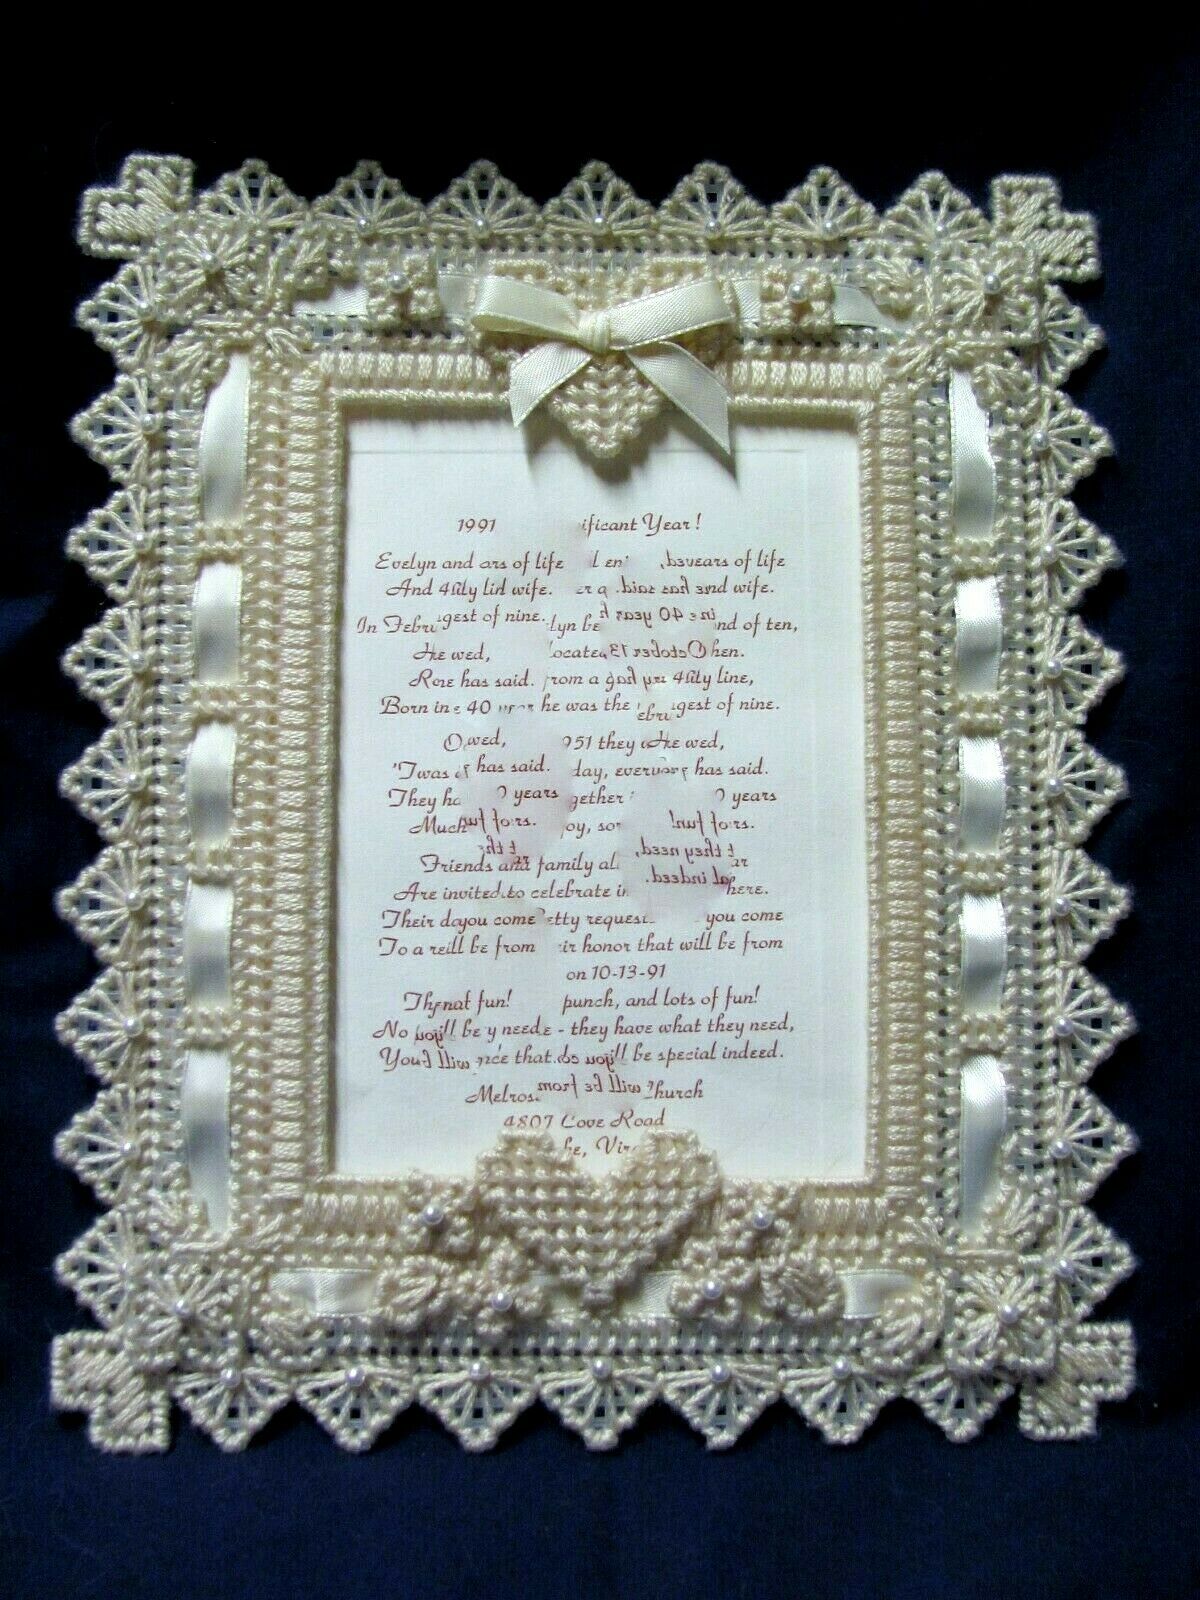 Finished Needlepoint Hanging Picture Frame Ecru & Pearls & Ribbon Hearts Flowers